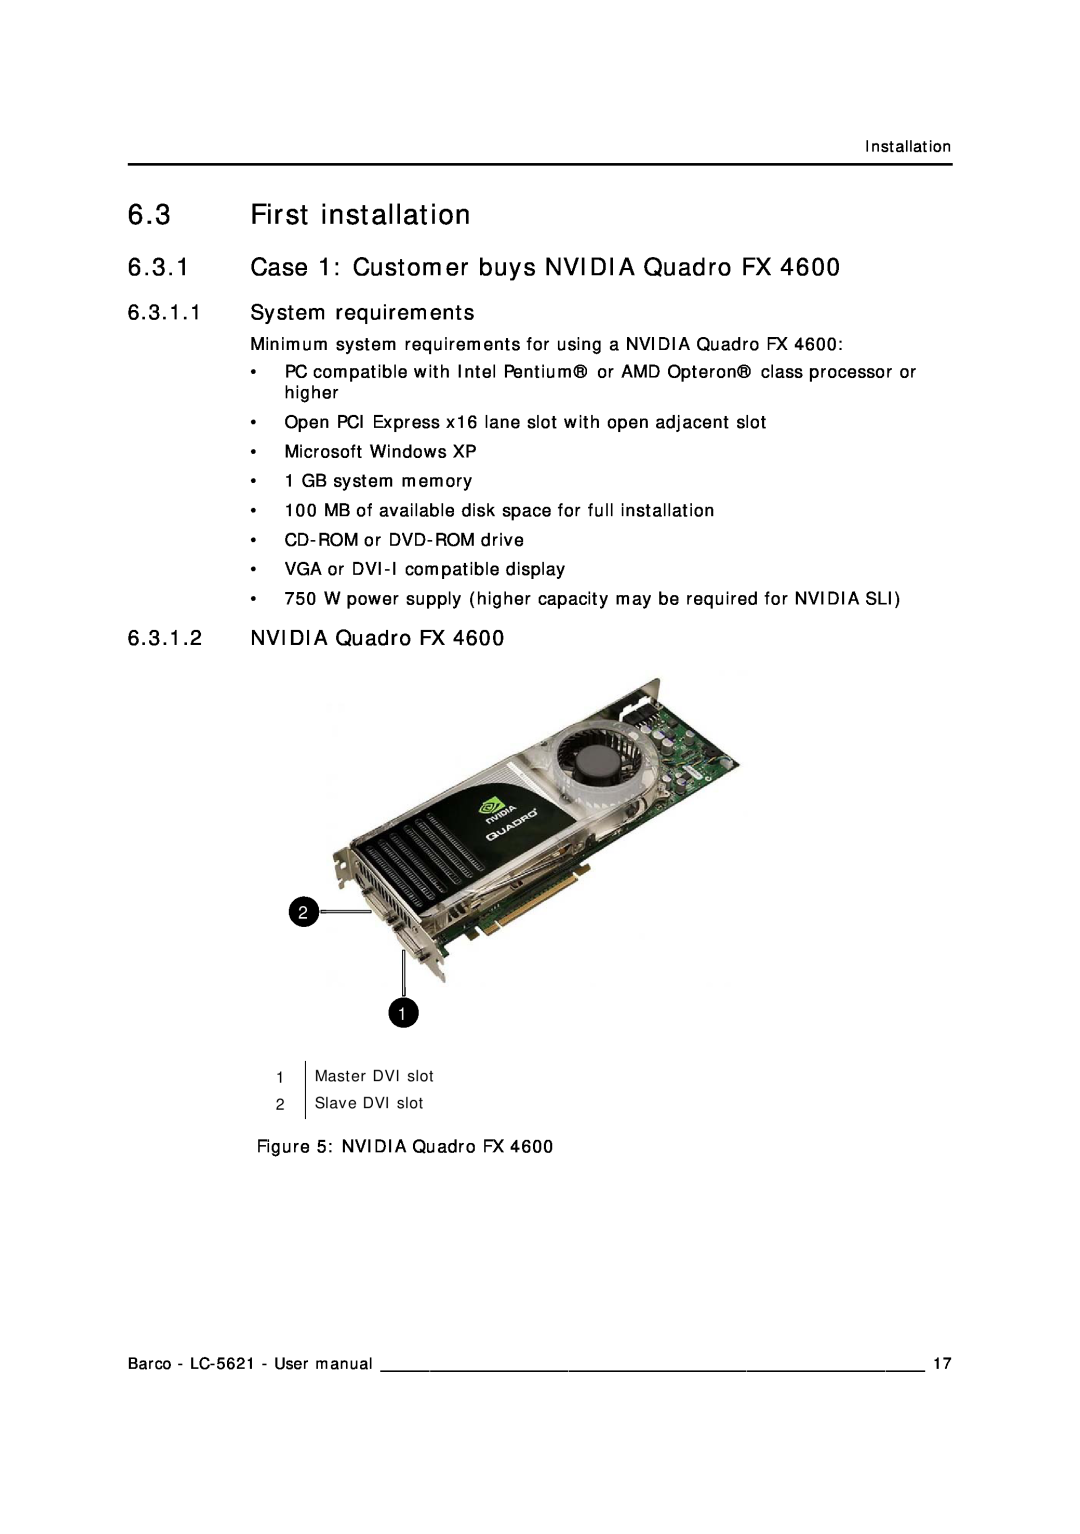 Barco LC-5621 user manual First installation, Case 1 Customer buys NVIDIA Quadro FX, System requirements 